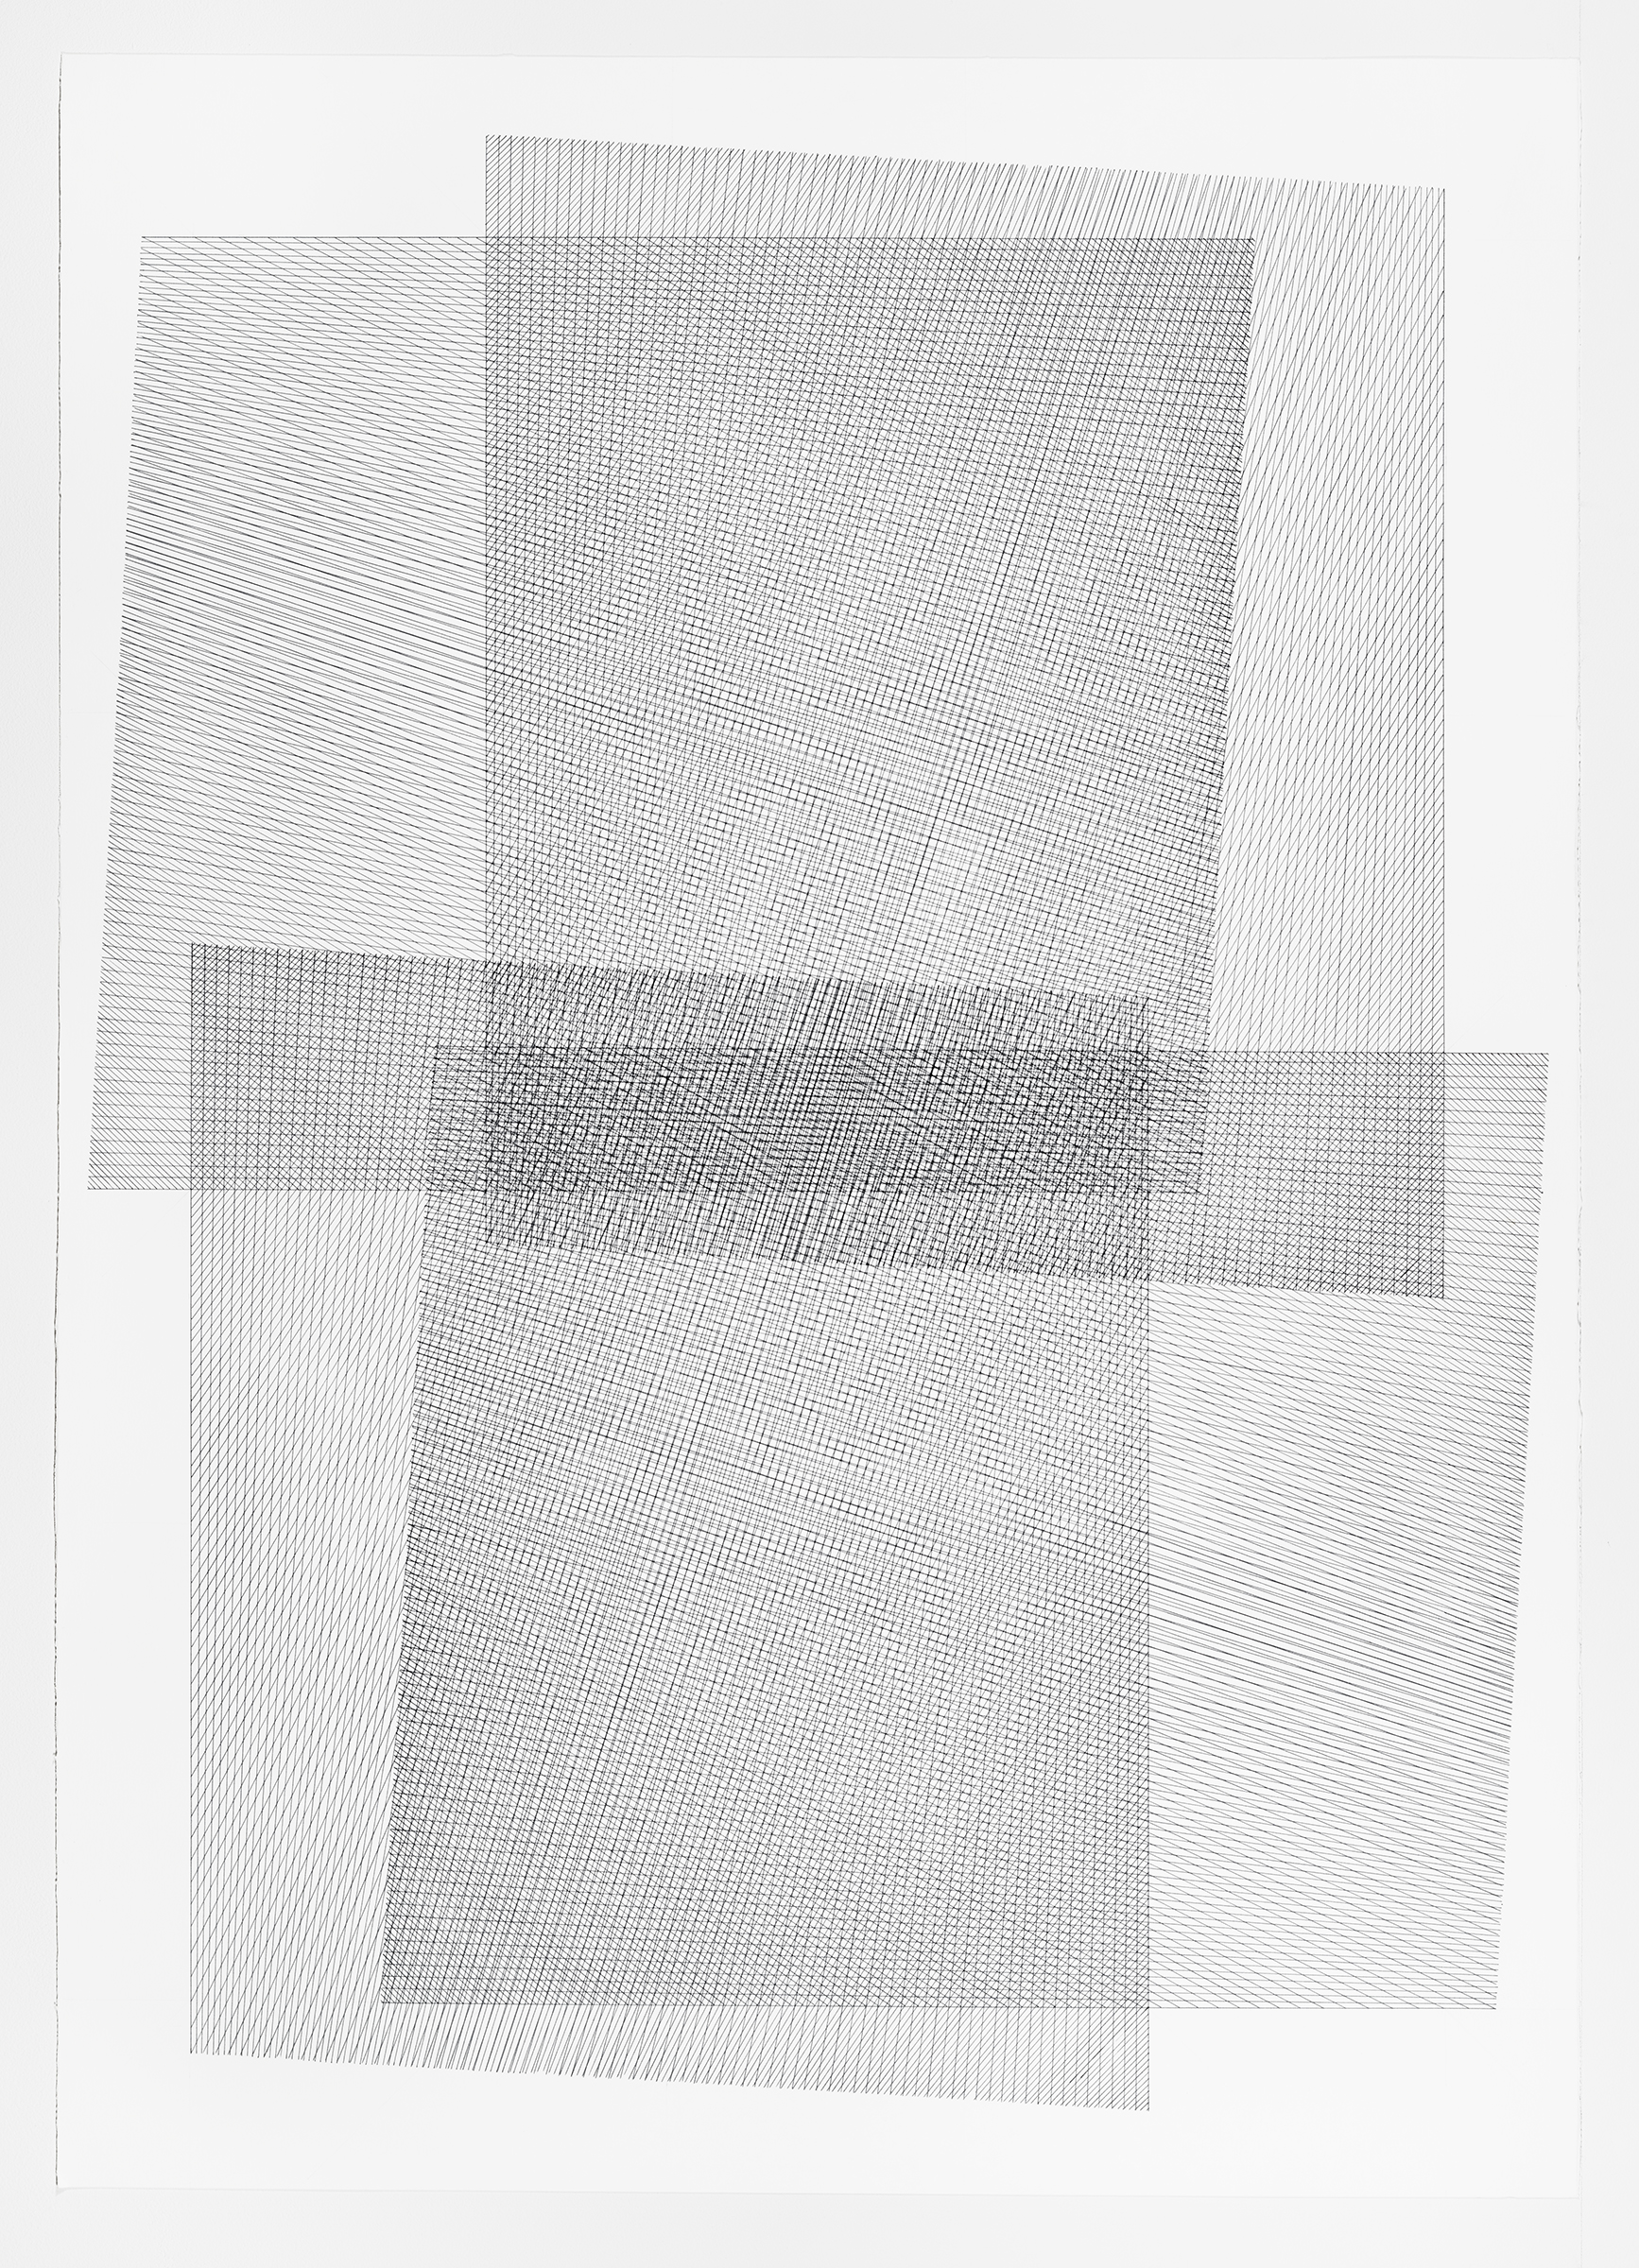 2 of 5; additive series, grey, 40 x 30 inches, 2016